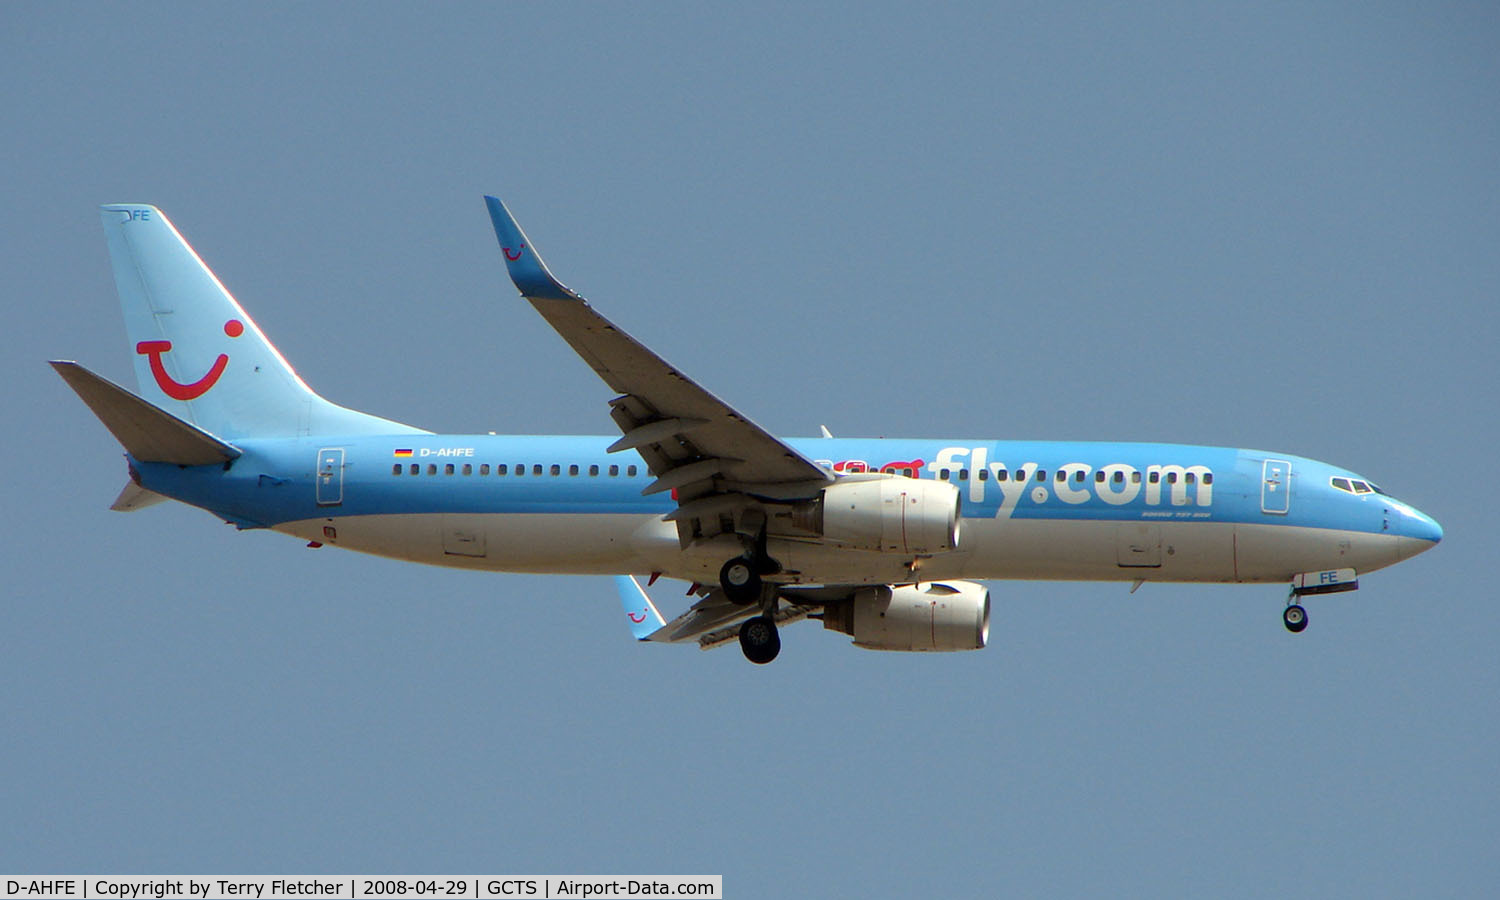 D-AHFE, 1998 Boeing 737-8K5 C/N 27979, TUI B737 on approach to Tenerife South